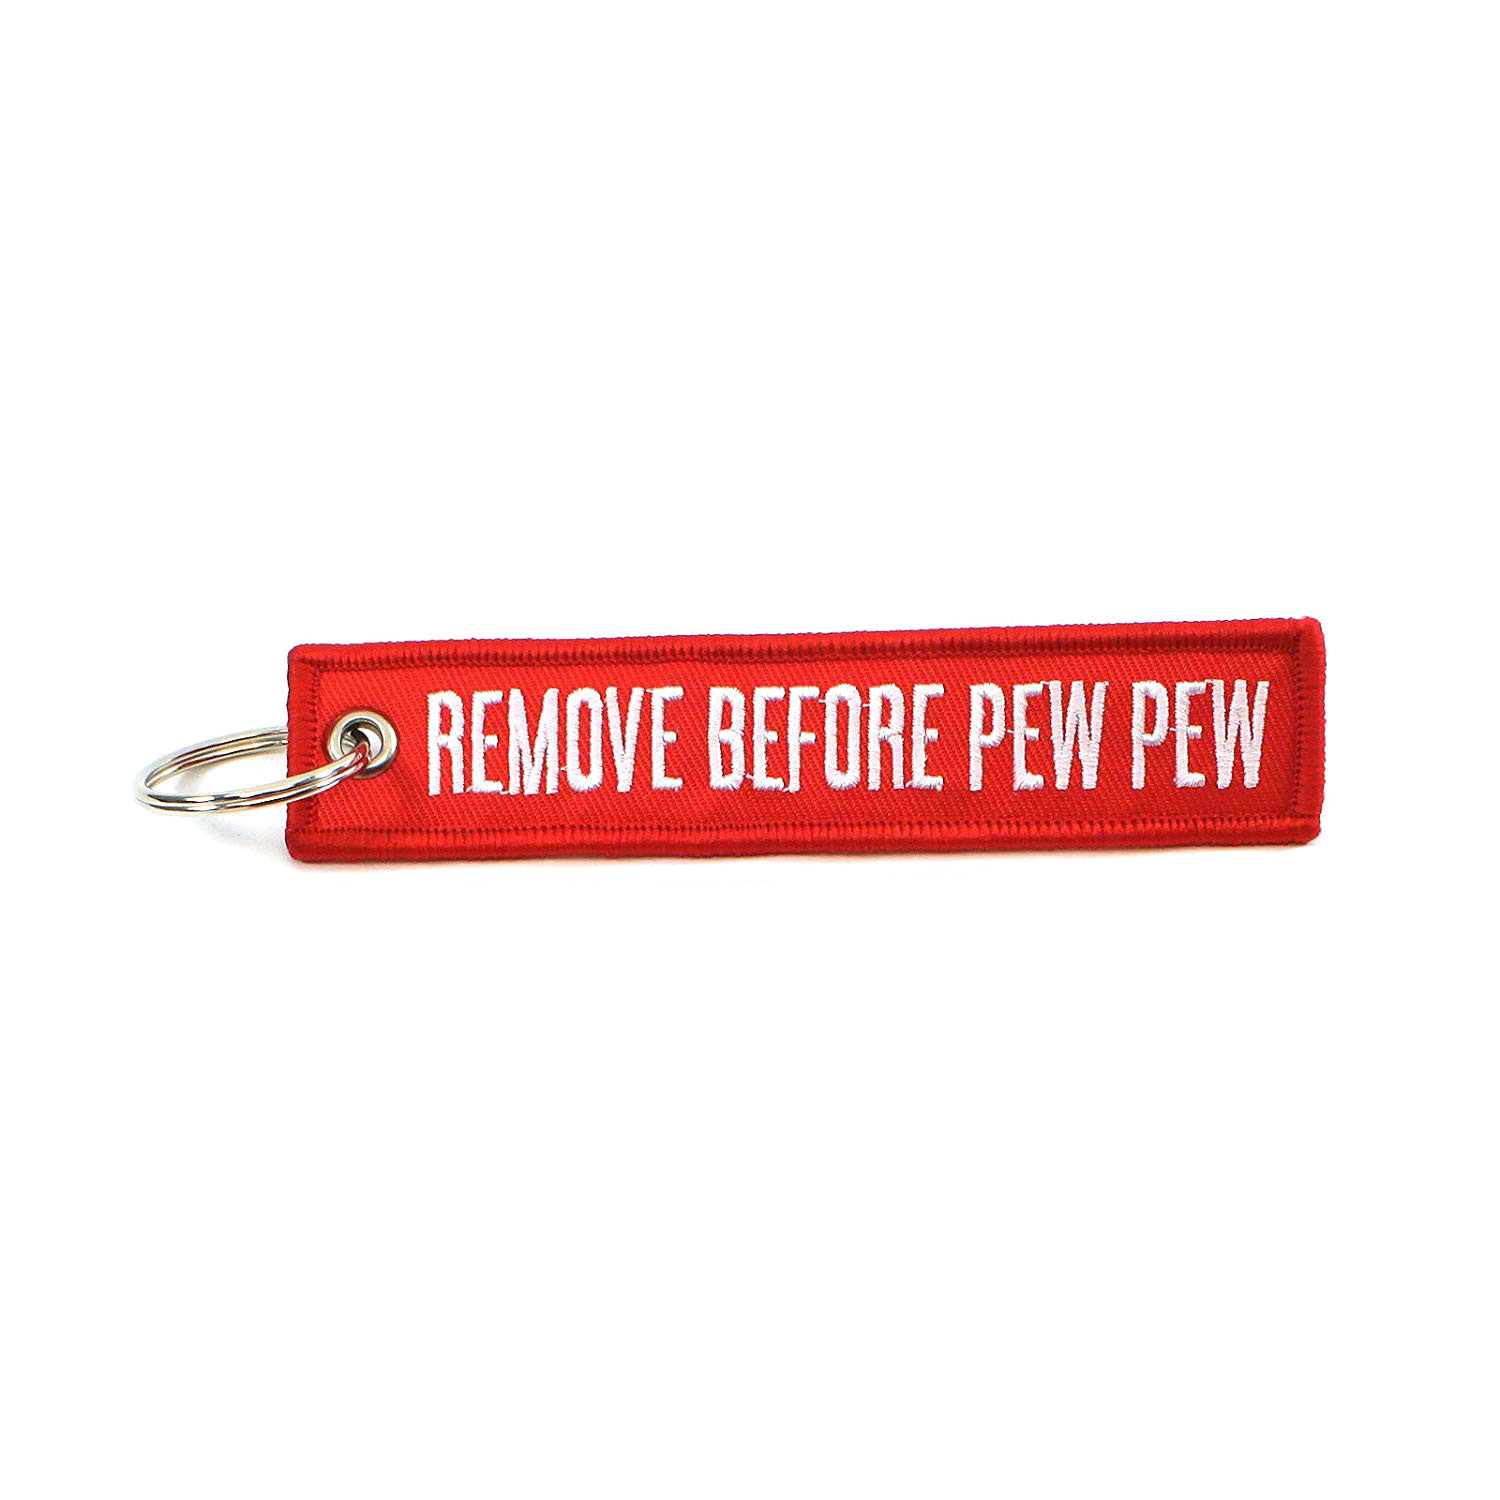 Chamberflag Tag - Remove Before Pew Pew